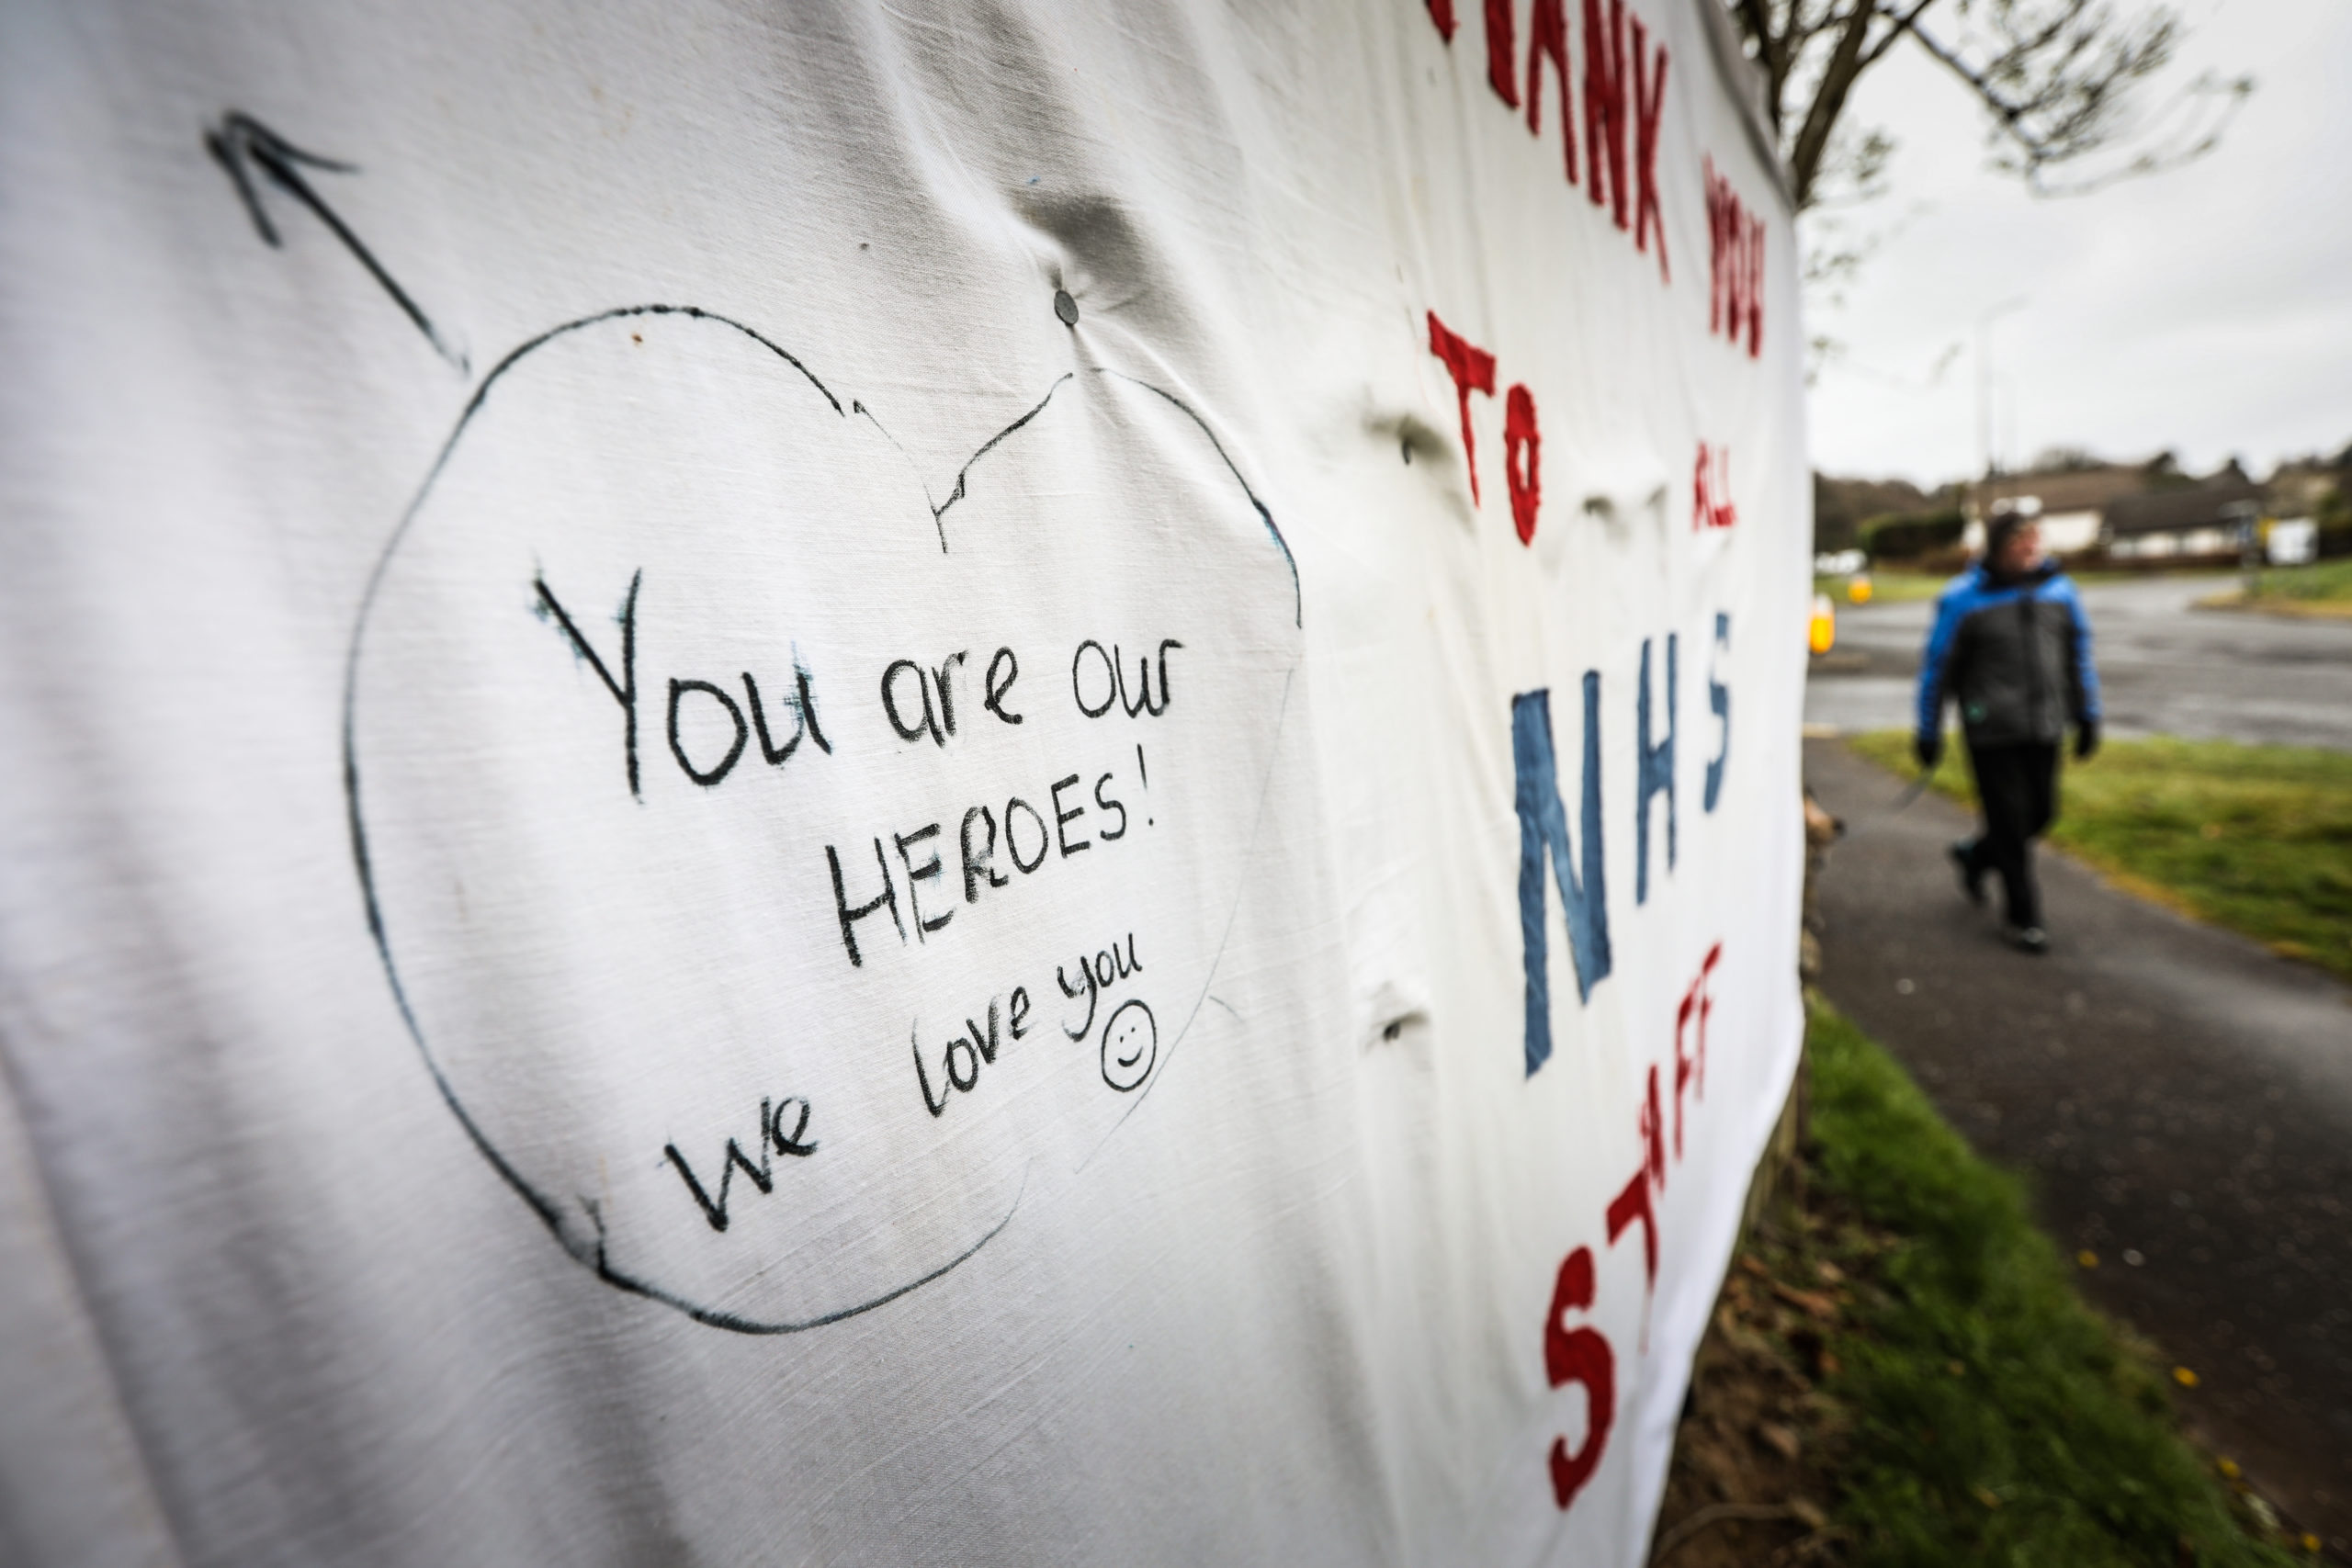 A message of support for NHS workers hung near Ninewells hospital in Dundee.